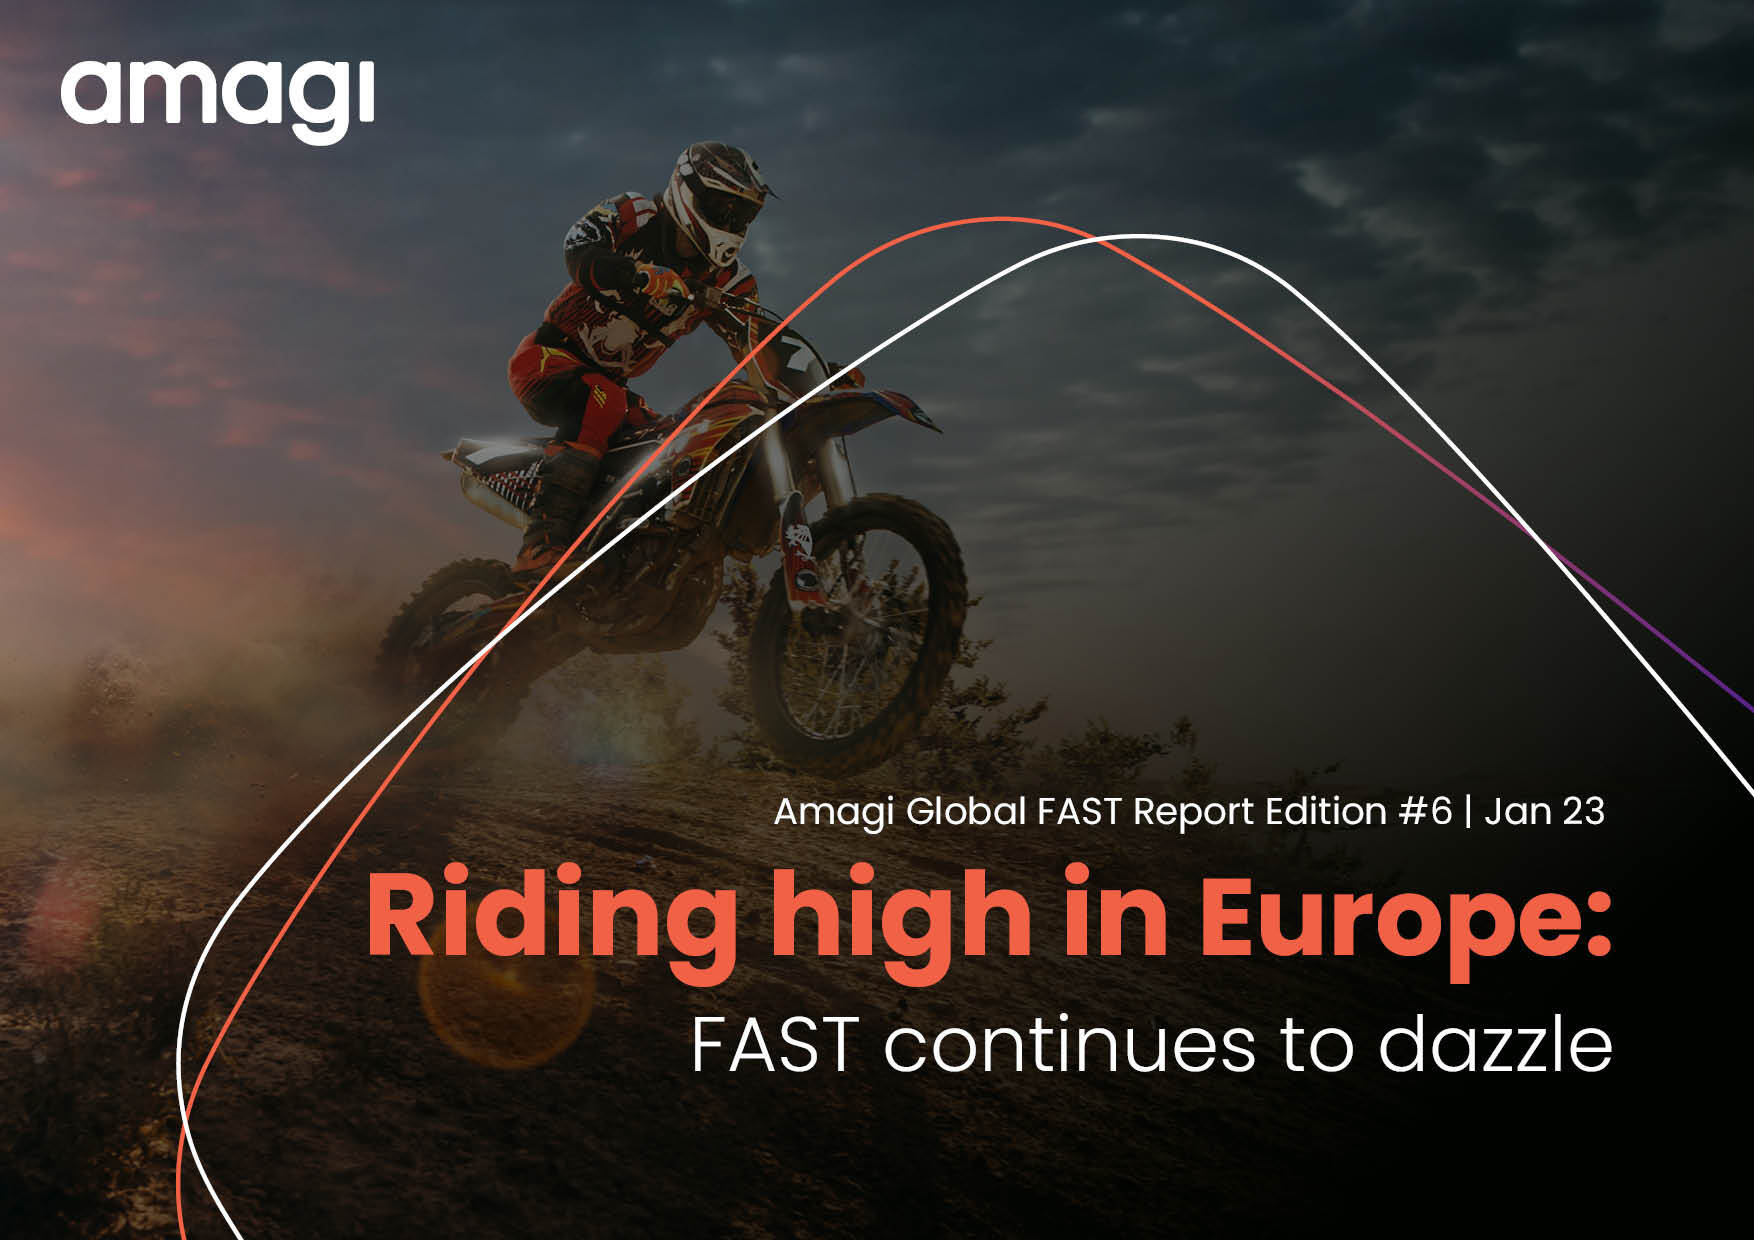 Amagi Significant growth for FAST in Europe Advanced Television